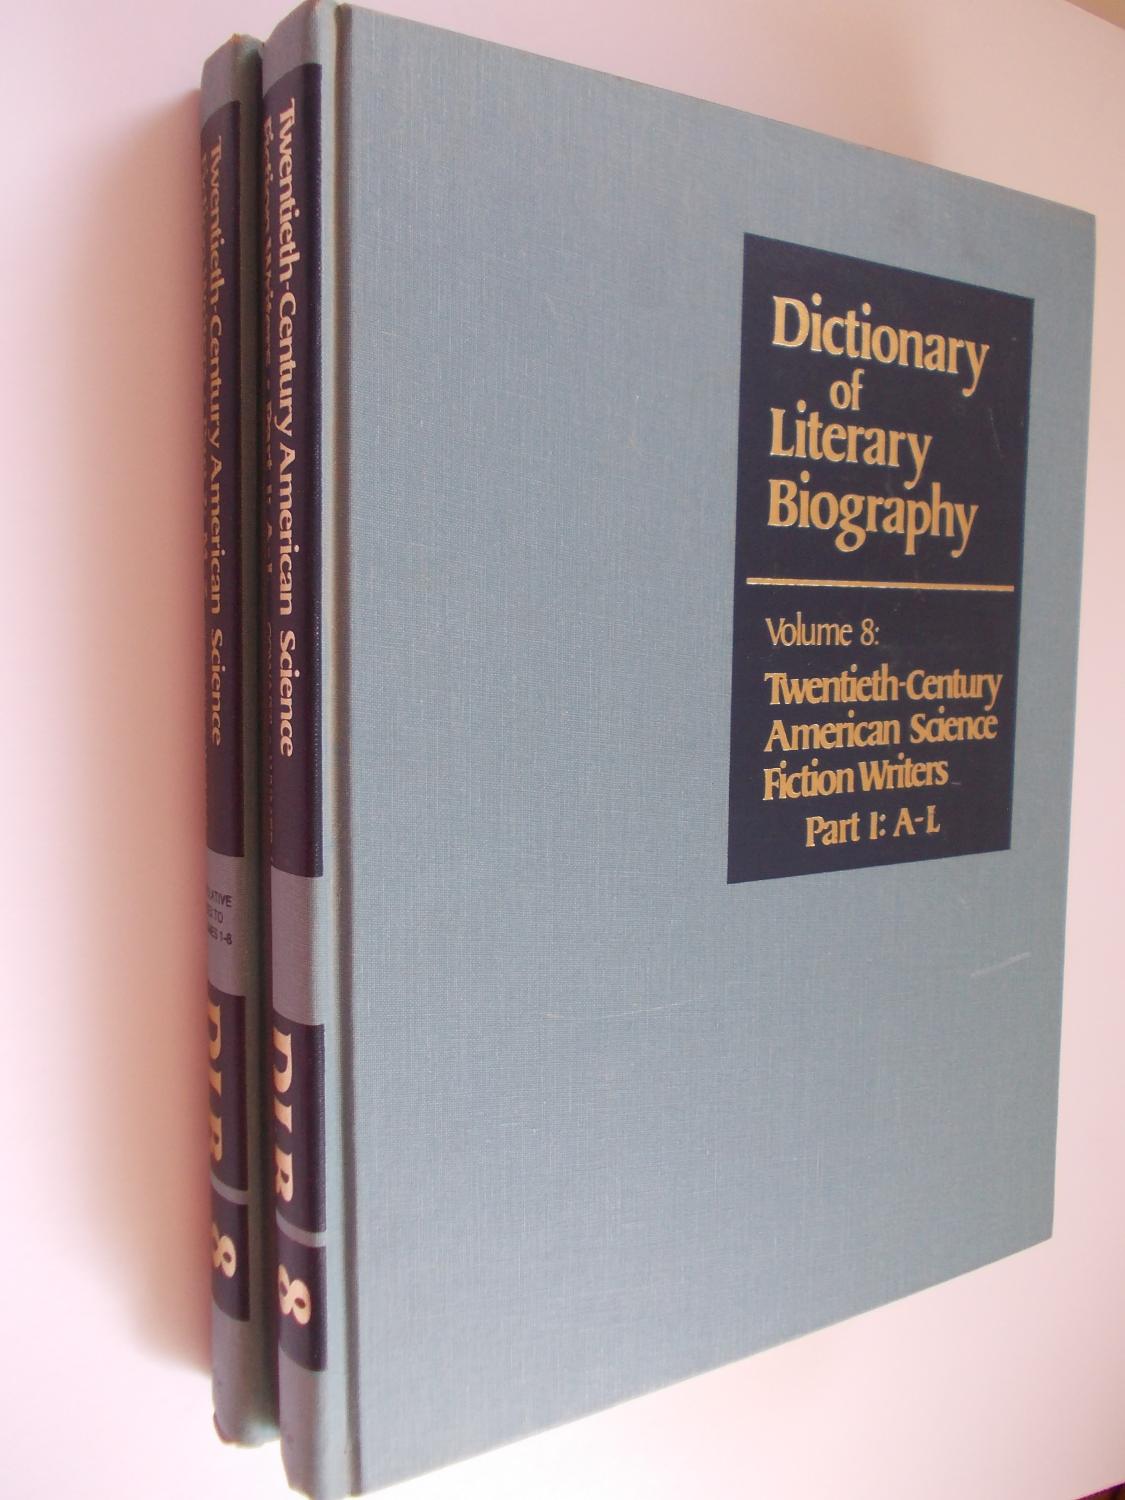 TWENTIETH-CENTURY AMERICAN SCIENCE FICTION WRITERS. (Dictionary of Literary Biography Volume 8) - Cowart, David and Thomas L. Wymer (eds).